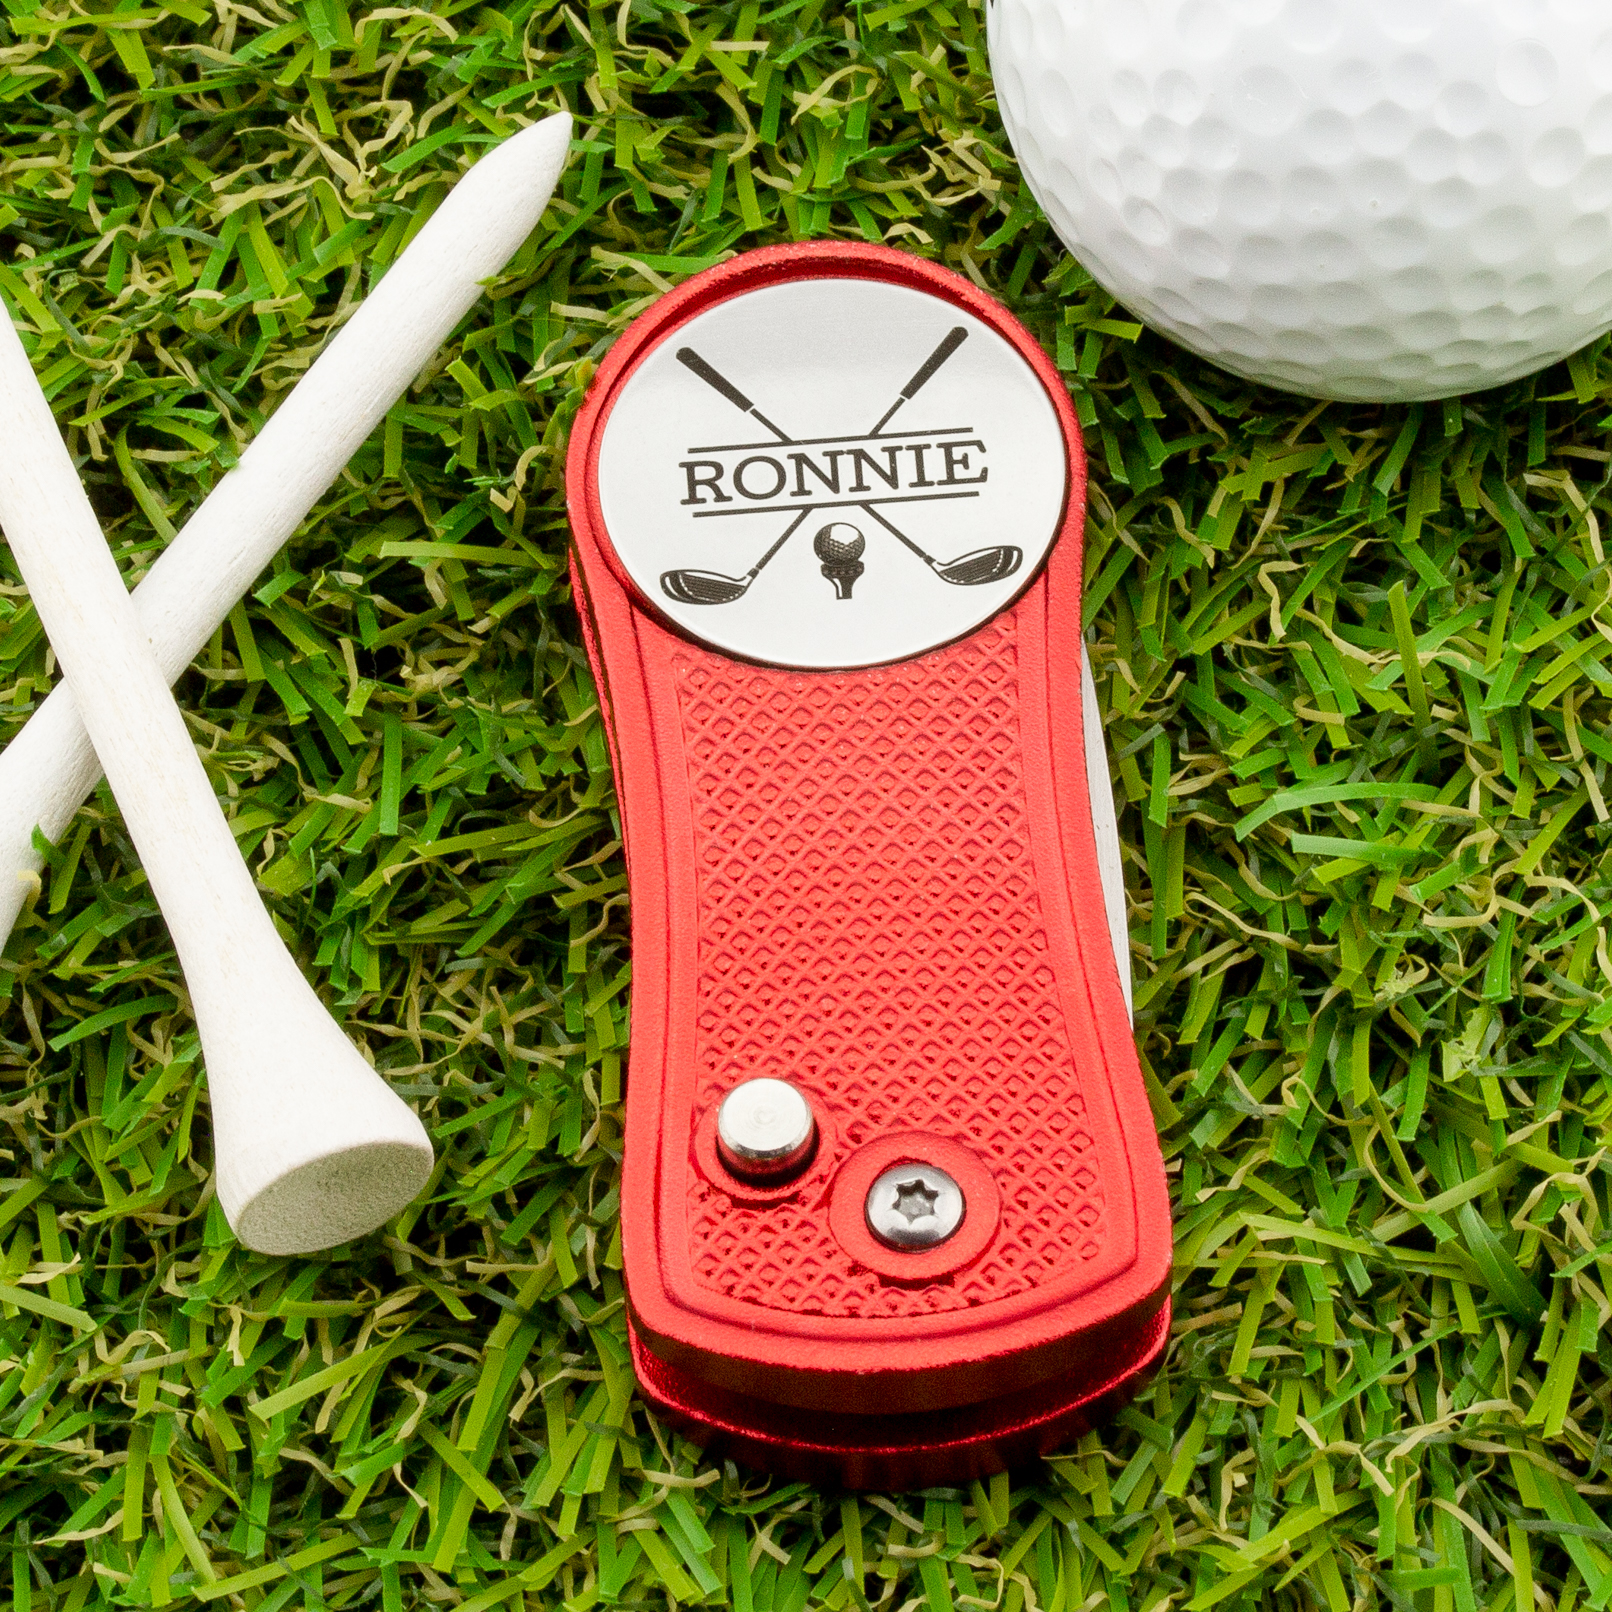 Divot Repair Tool and Ball Marker Personalized Golf Gifts for Men -  Heartfelt Tokens